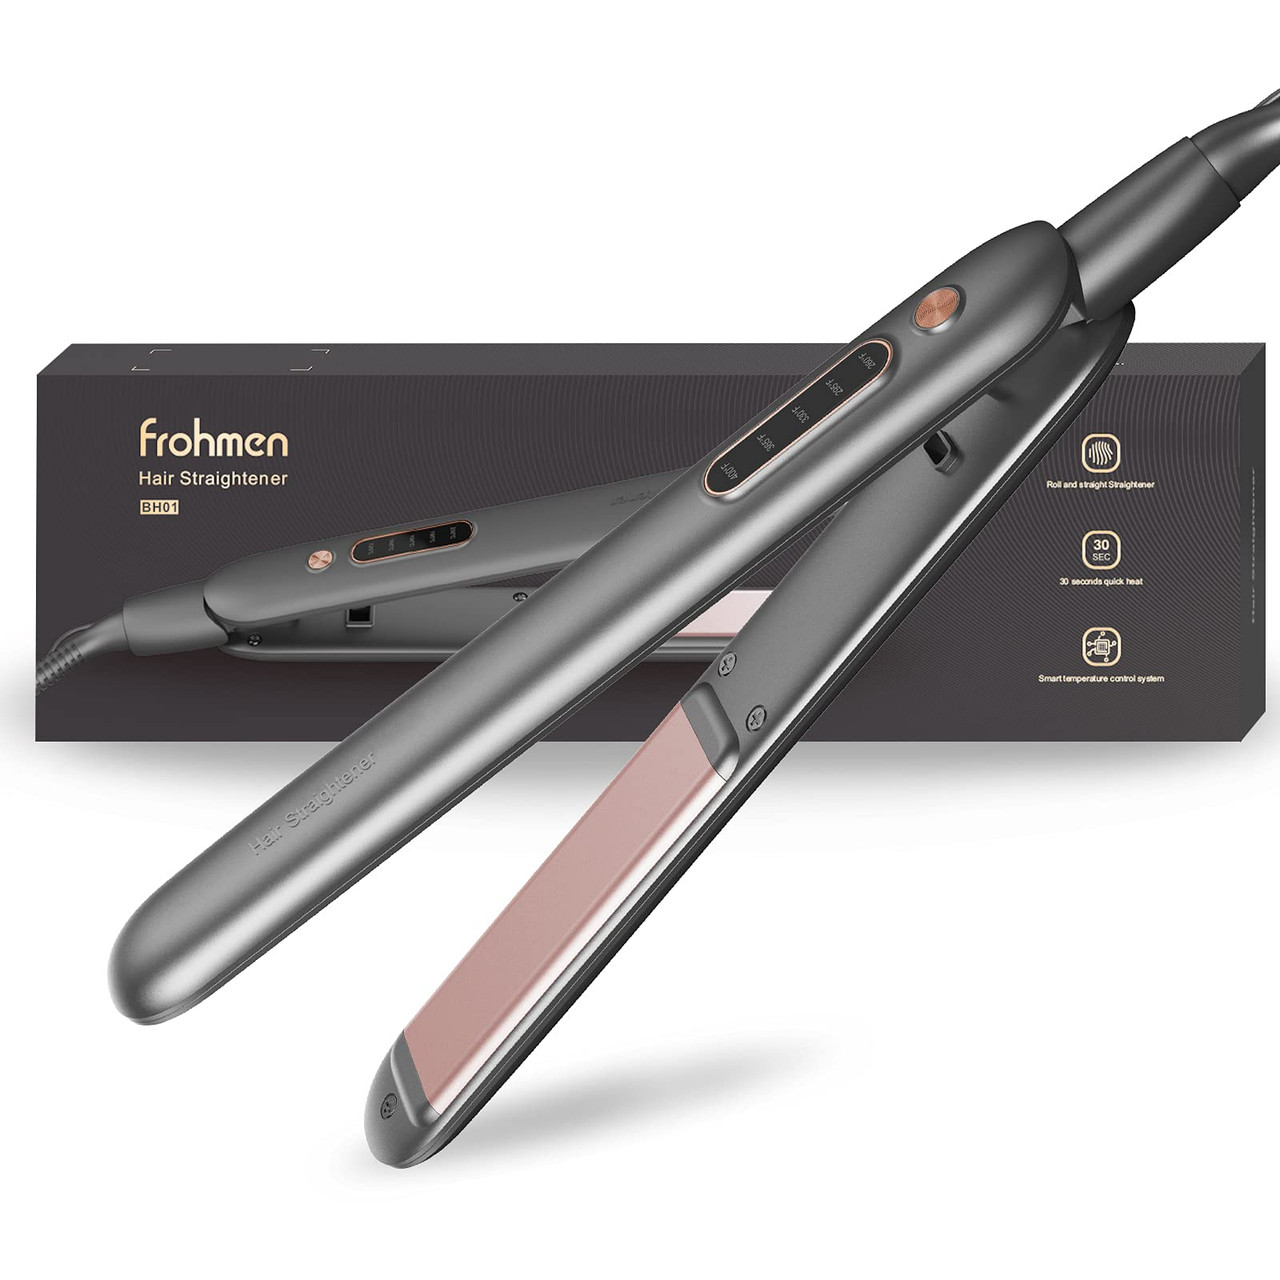 Professional Hair Salon Styling Hair Straightener With Rapid Heating And  Heat Balance Technology Automatic off For safety Black  24x7 eMall